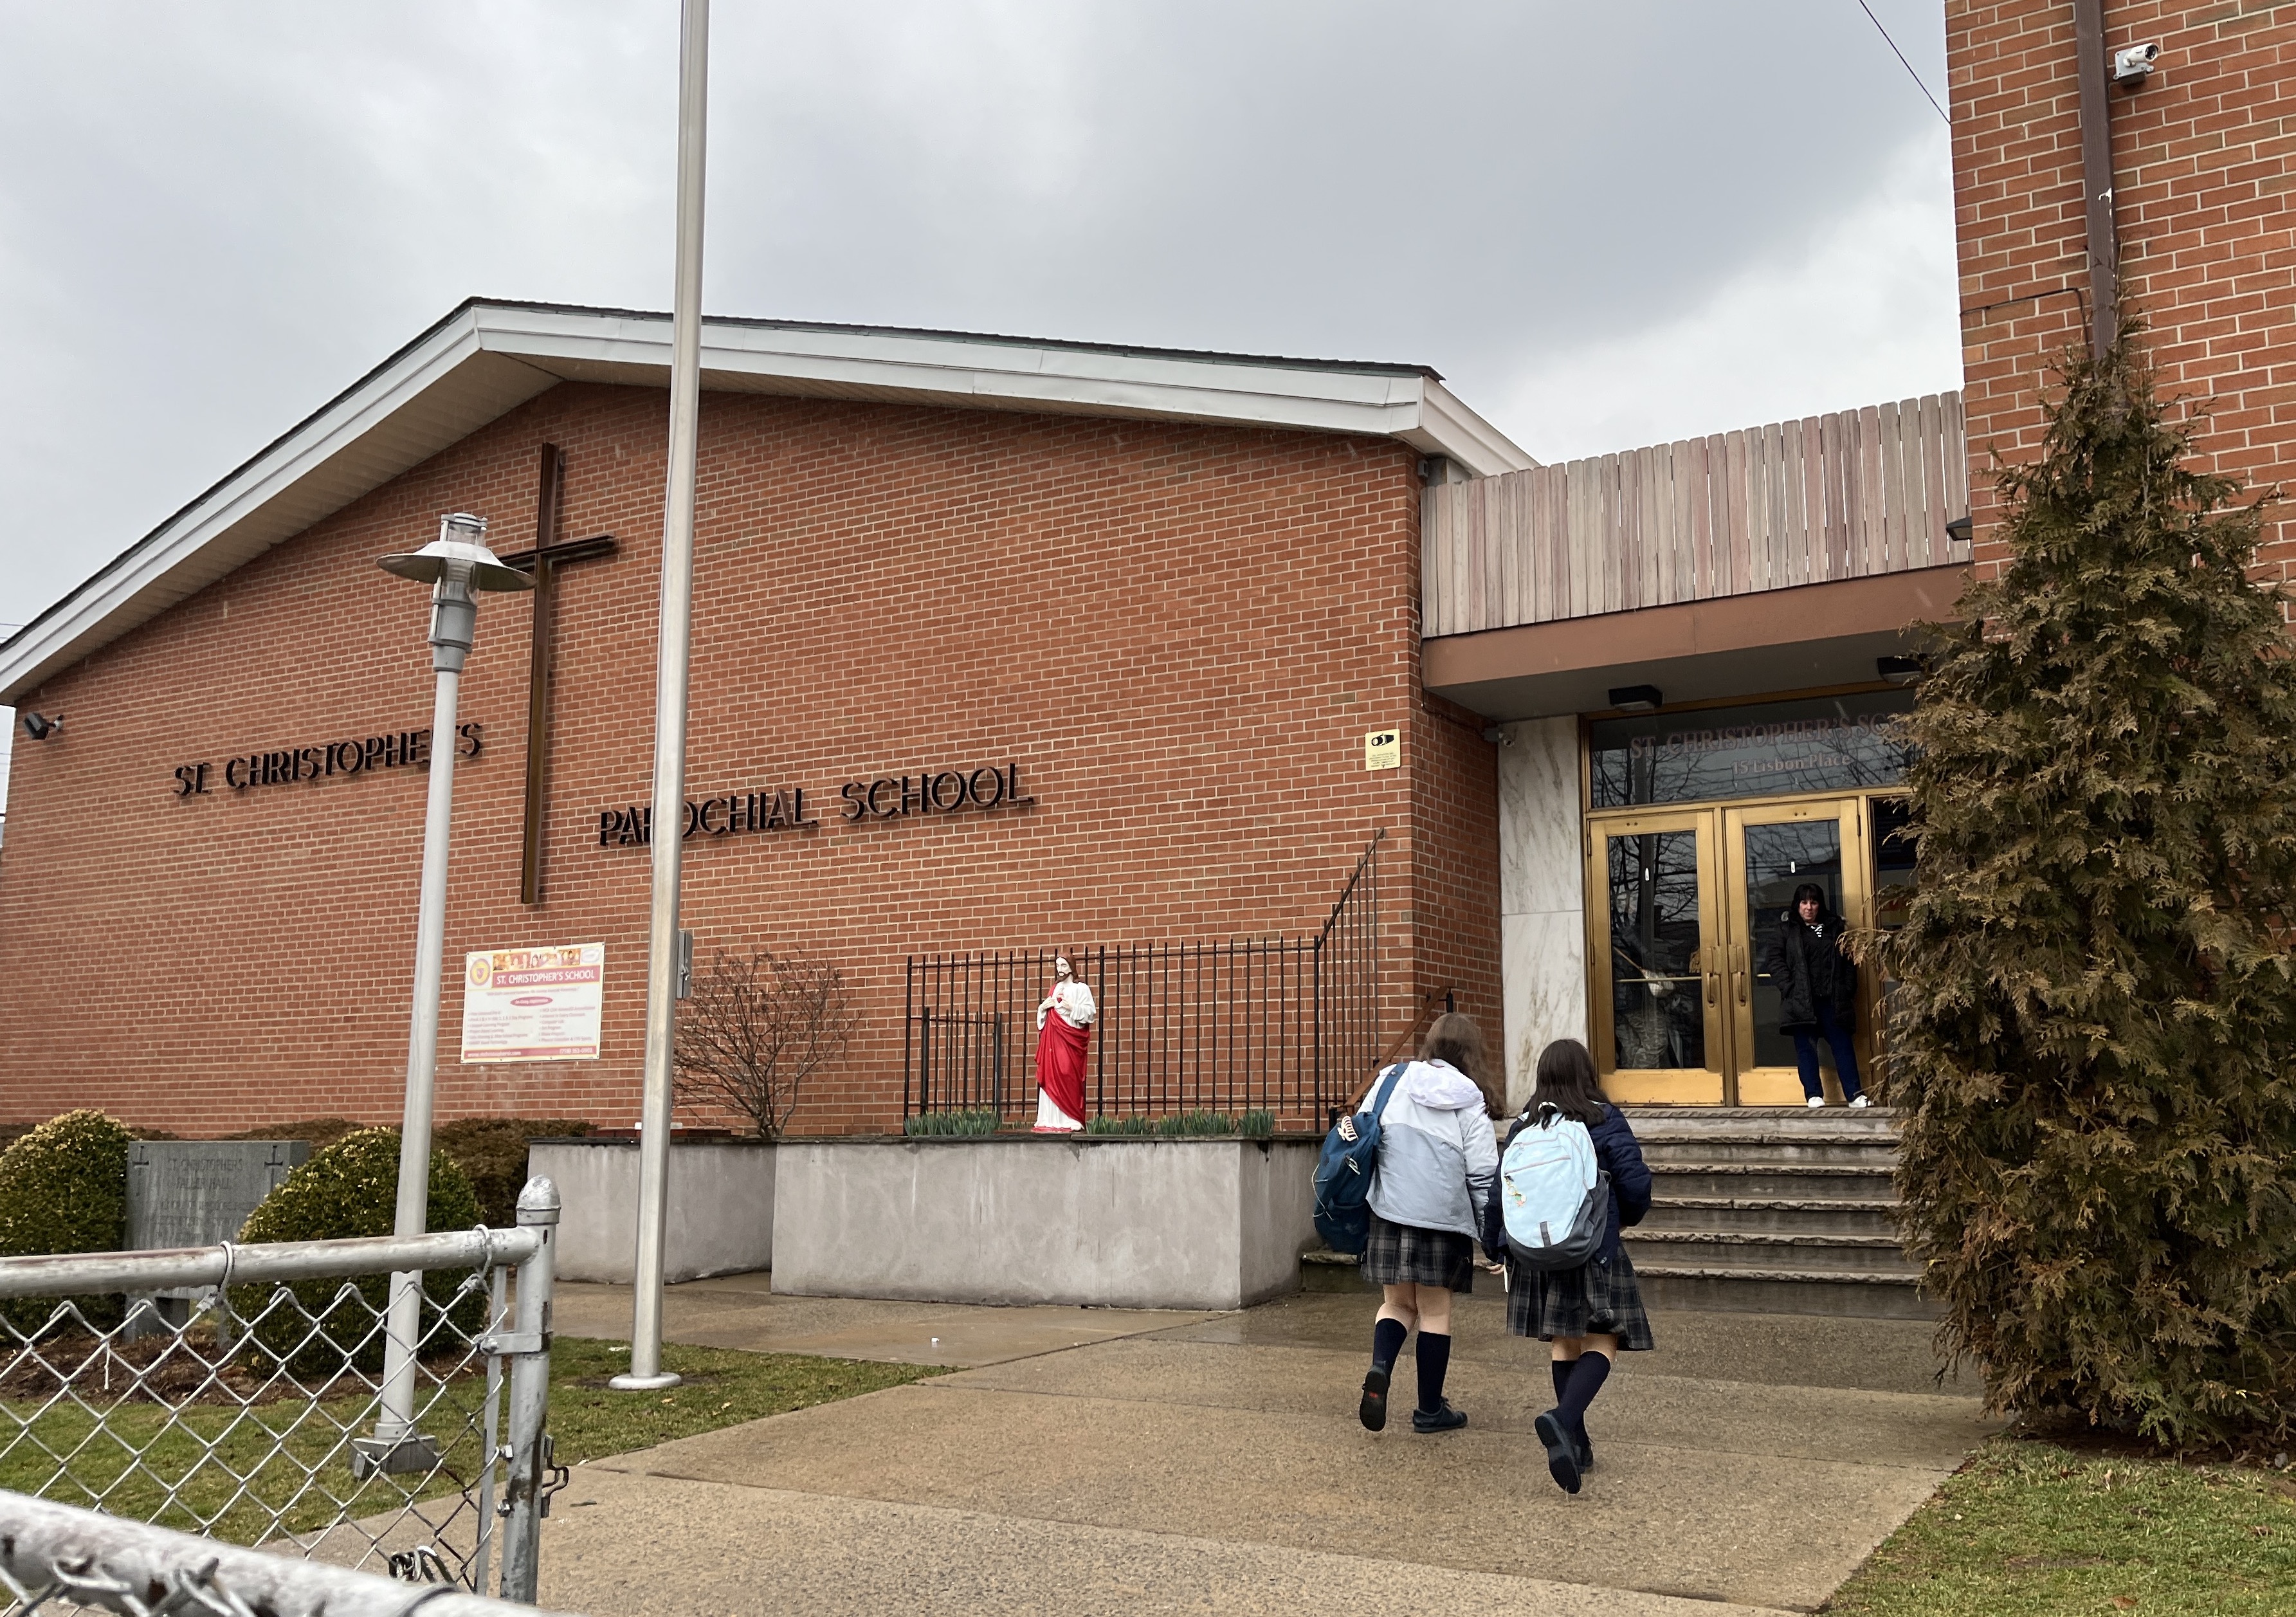 Beyond devastated': Families react to looming closure of Staten Island  Catholic elementary school - silive.com